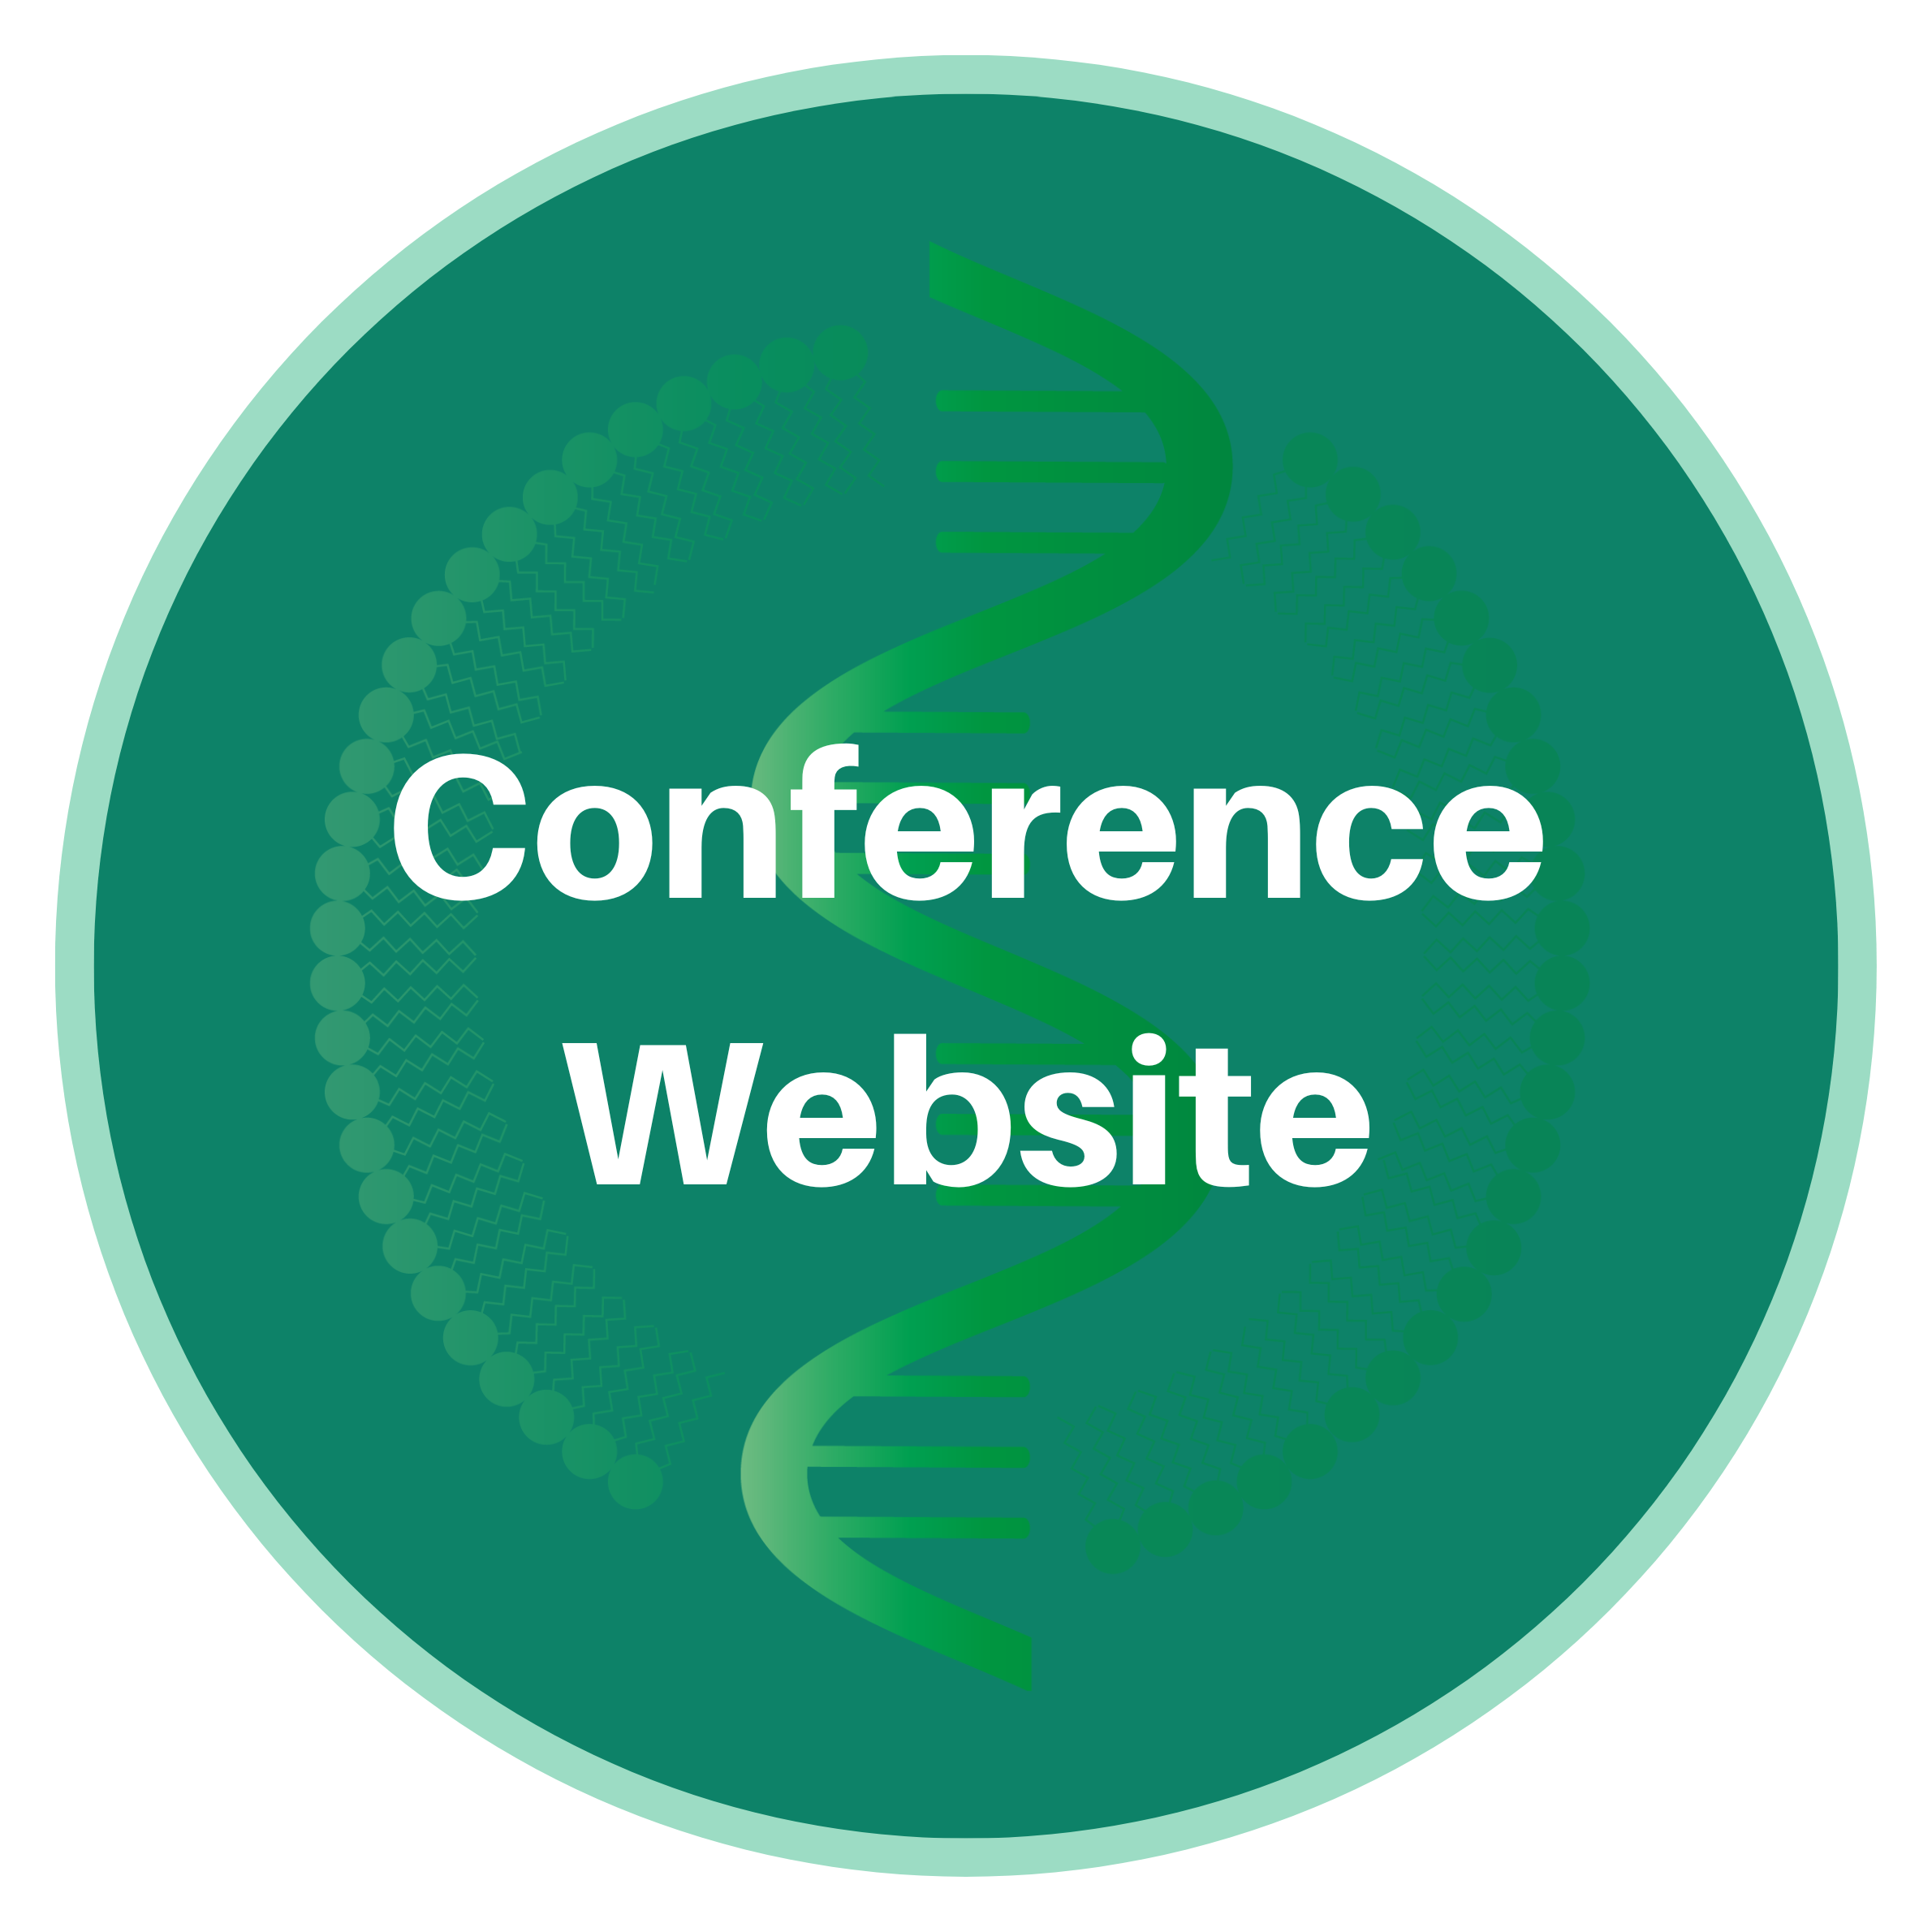 Conference Website Button